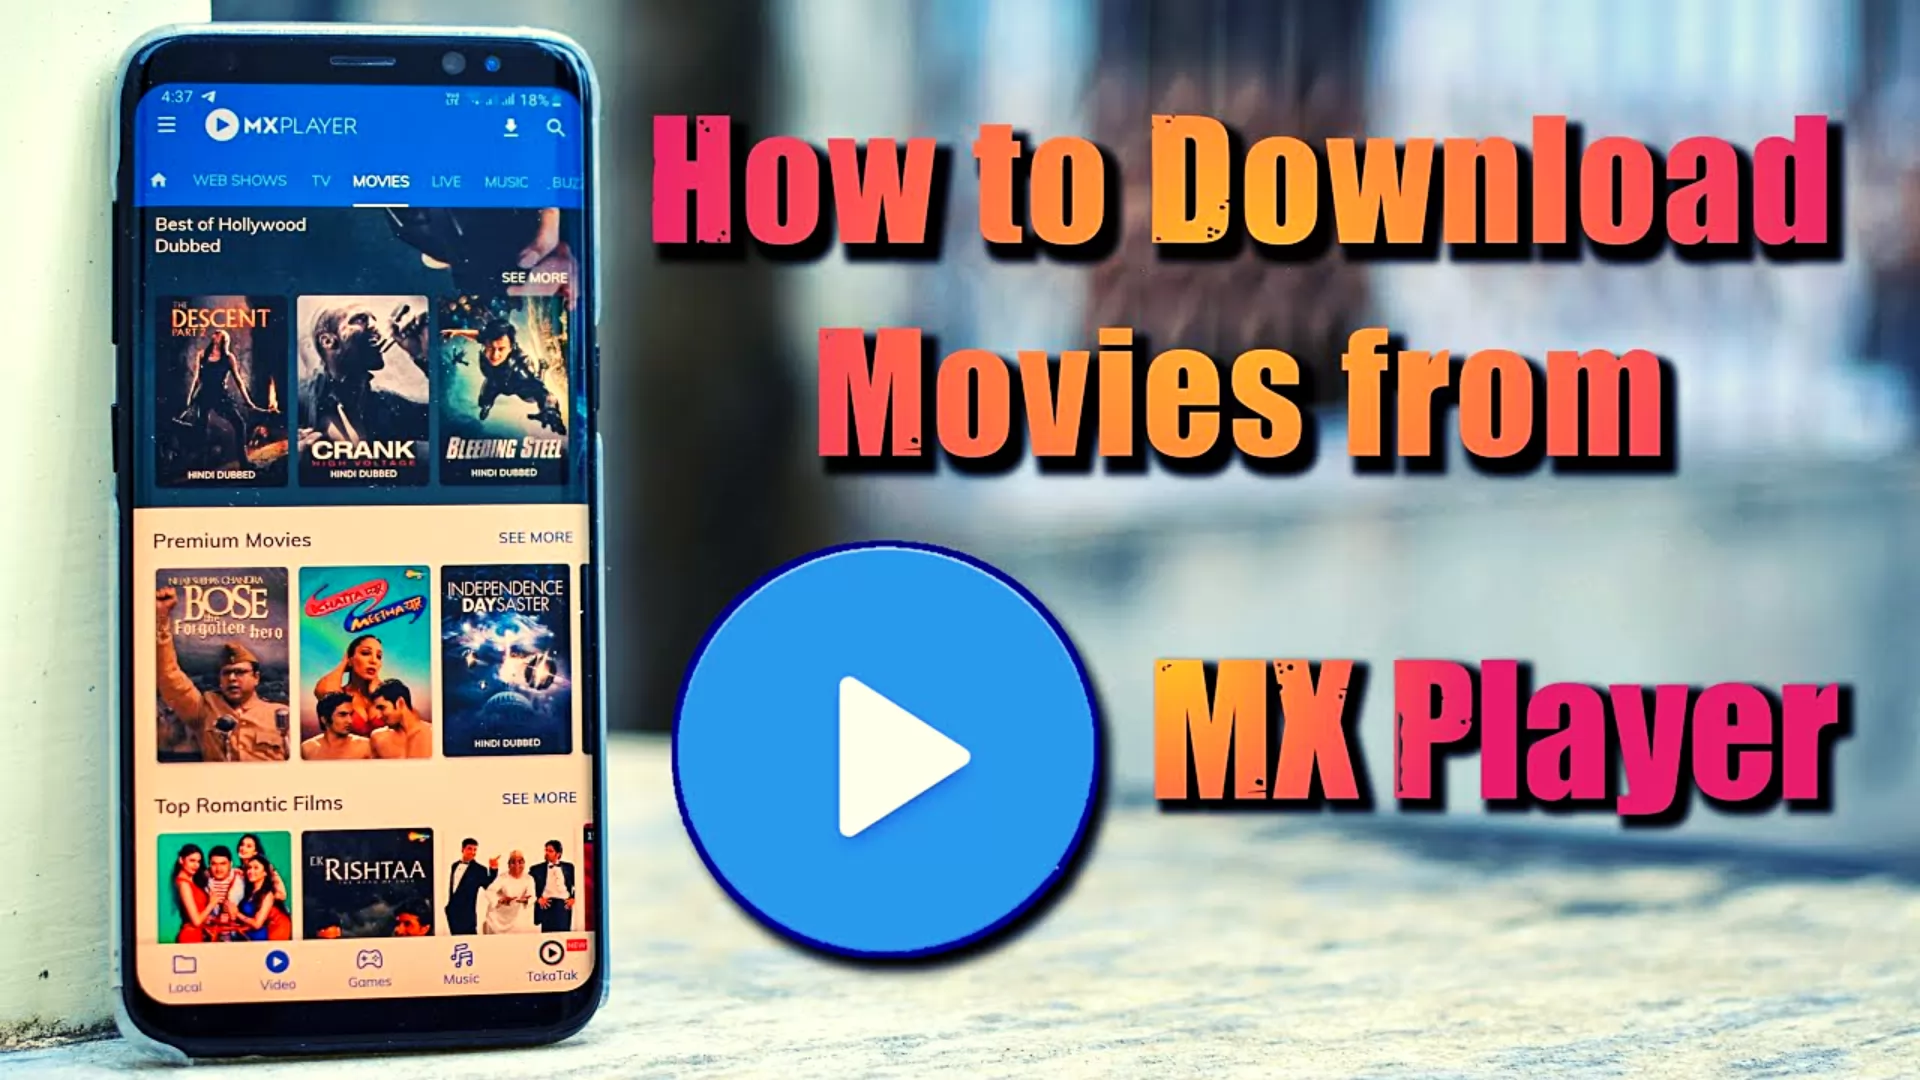 How To Download Movies From MX Player?